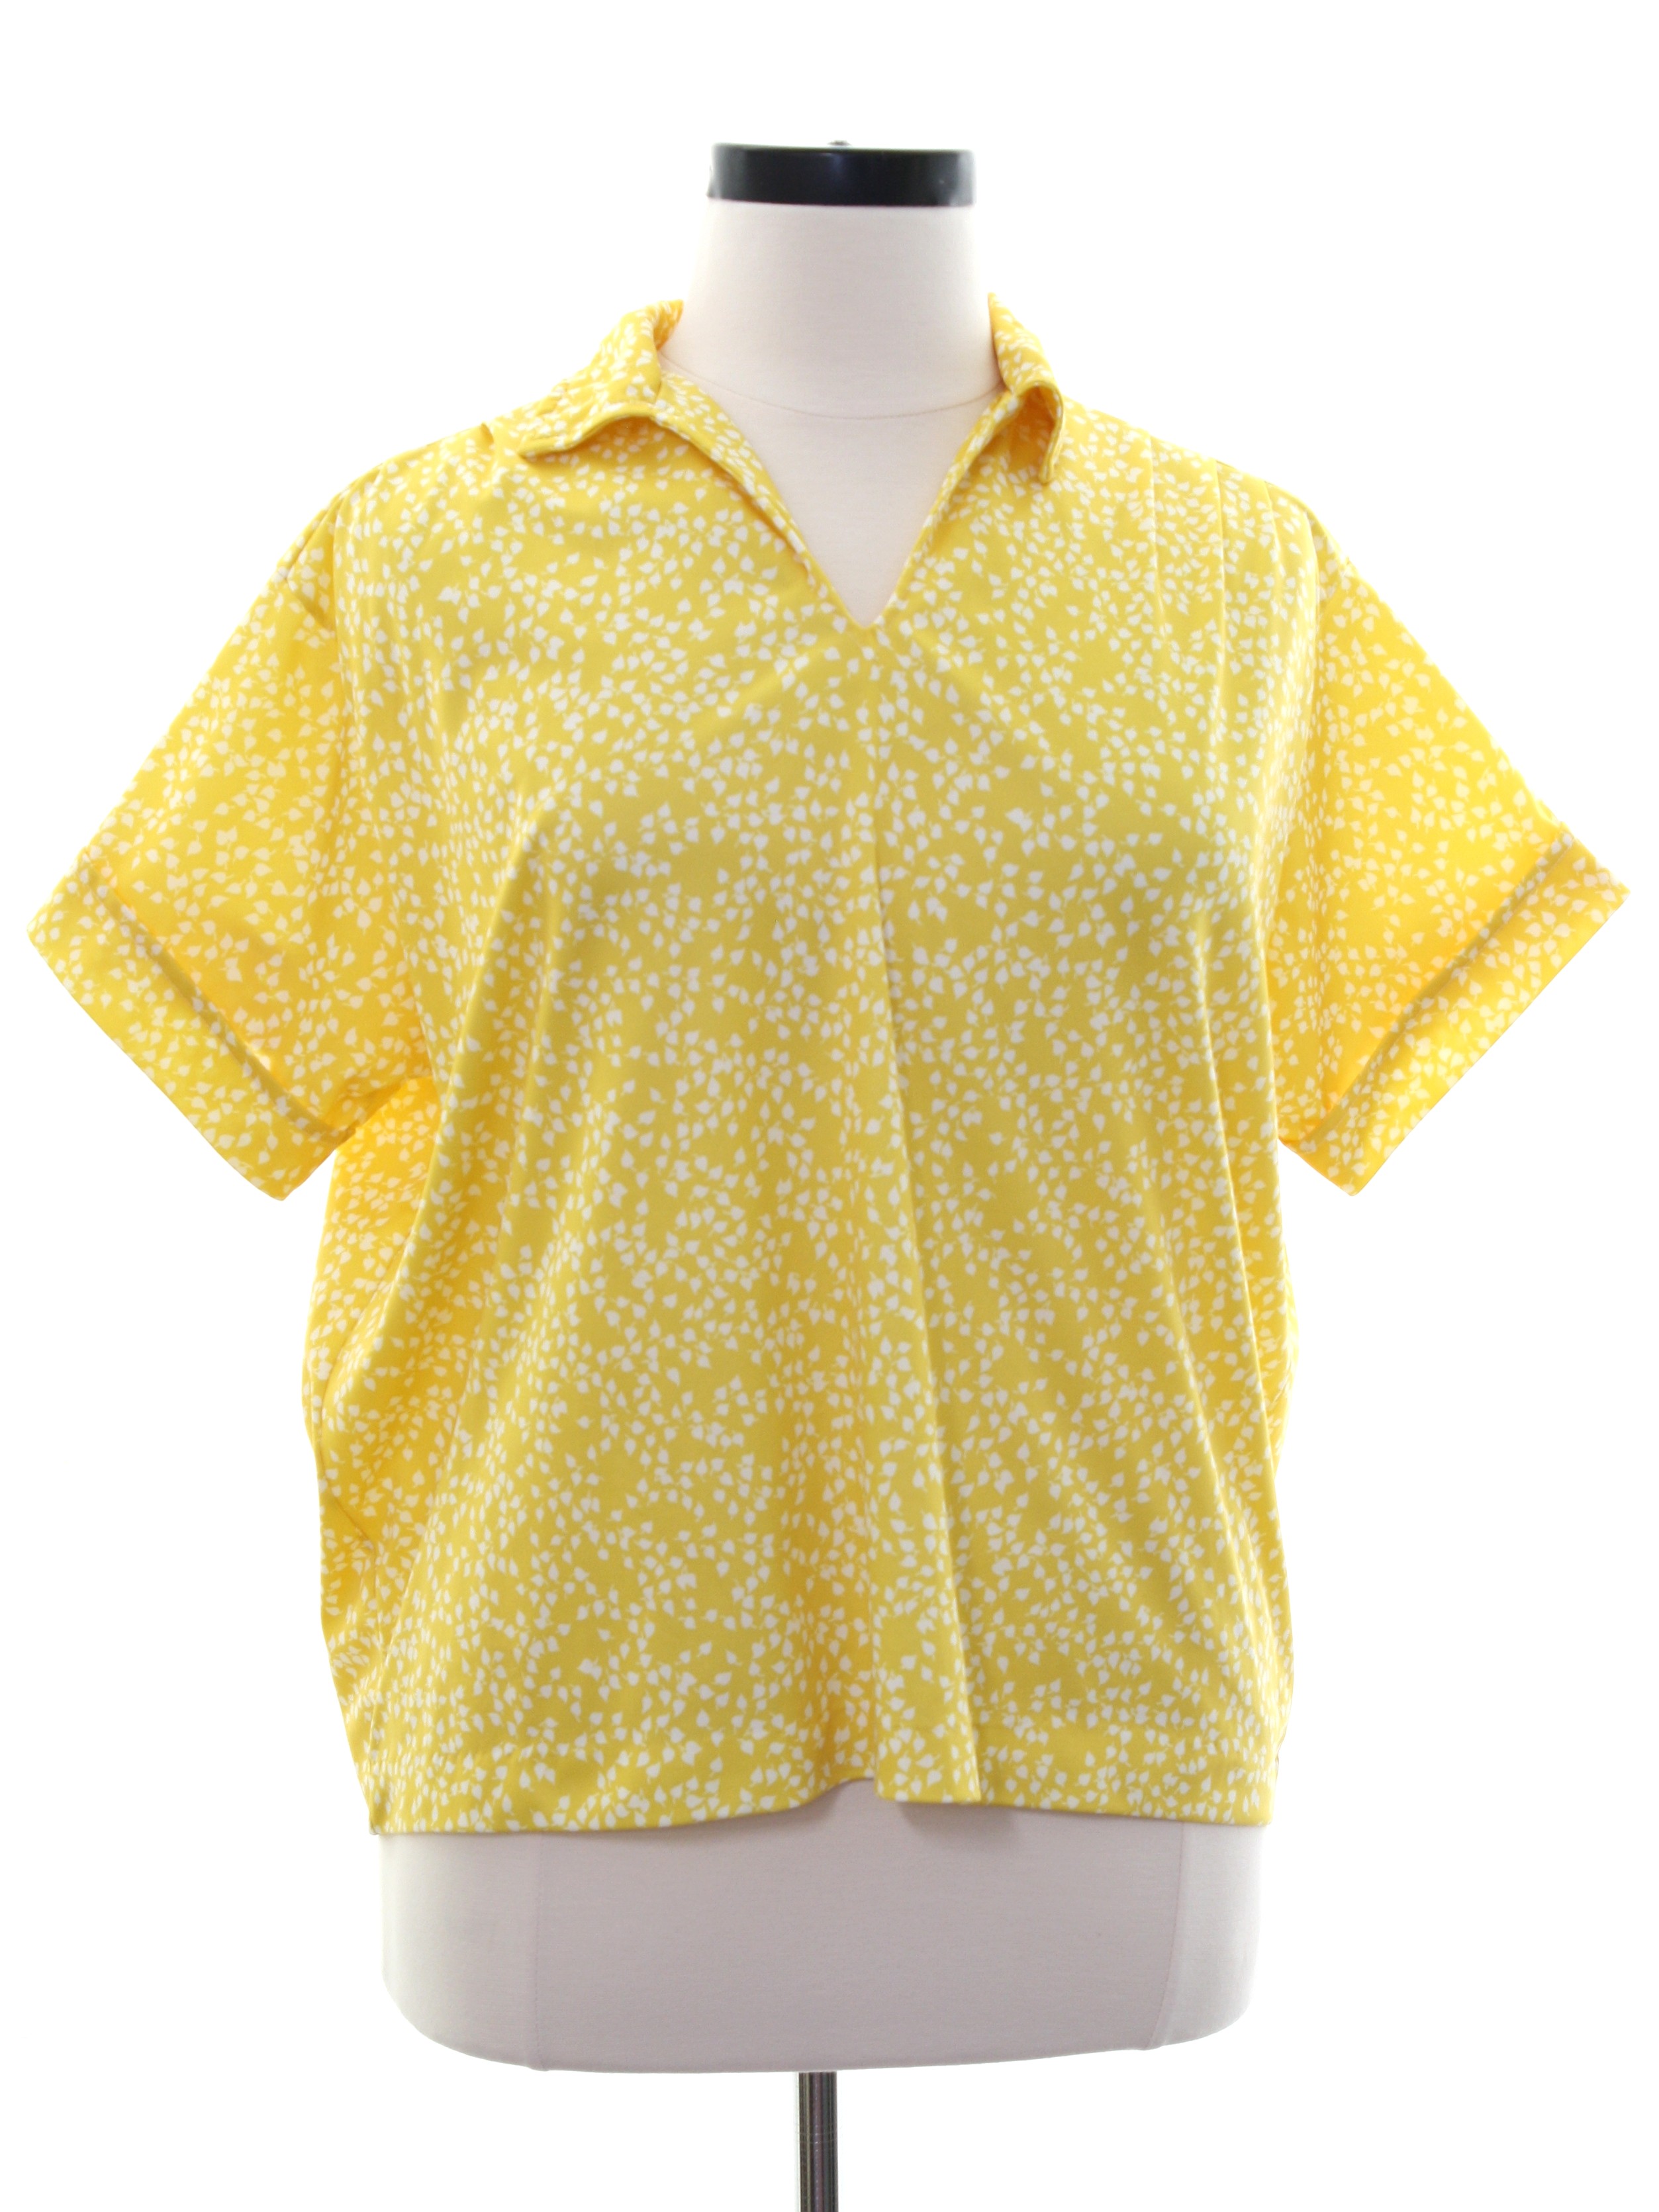 70's Vintage Shirt: Late 70s or Early 80s -Pretty Tops- Womens golden ...